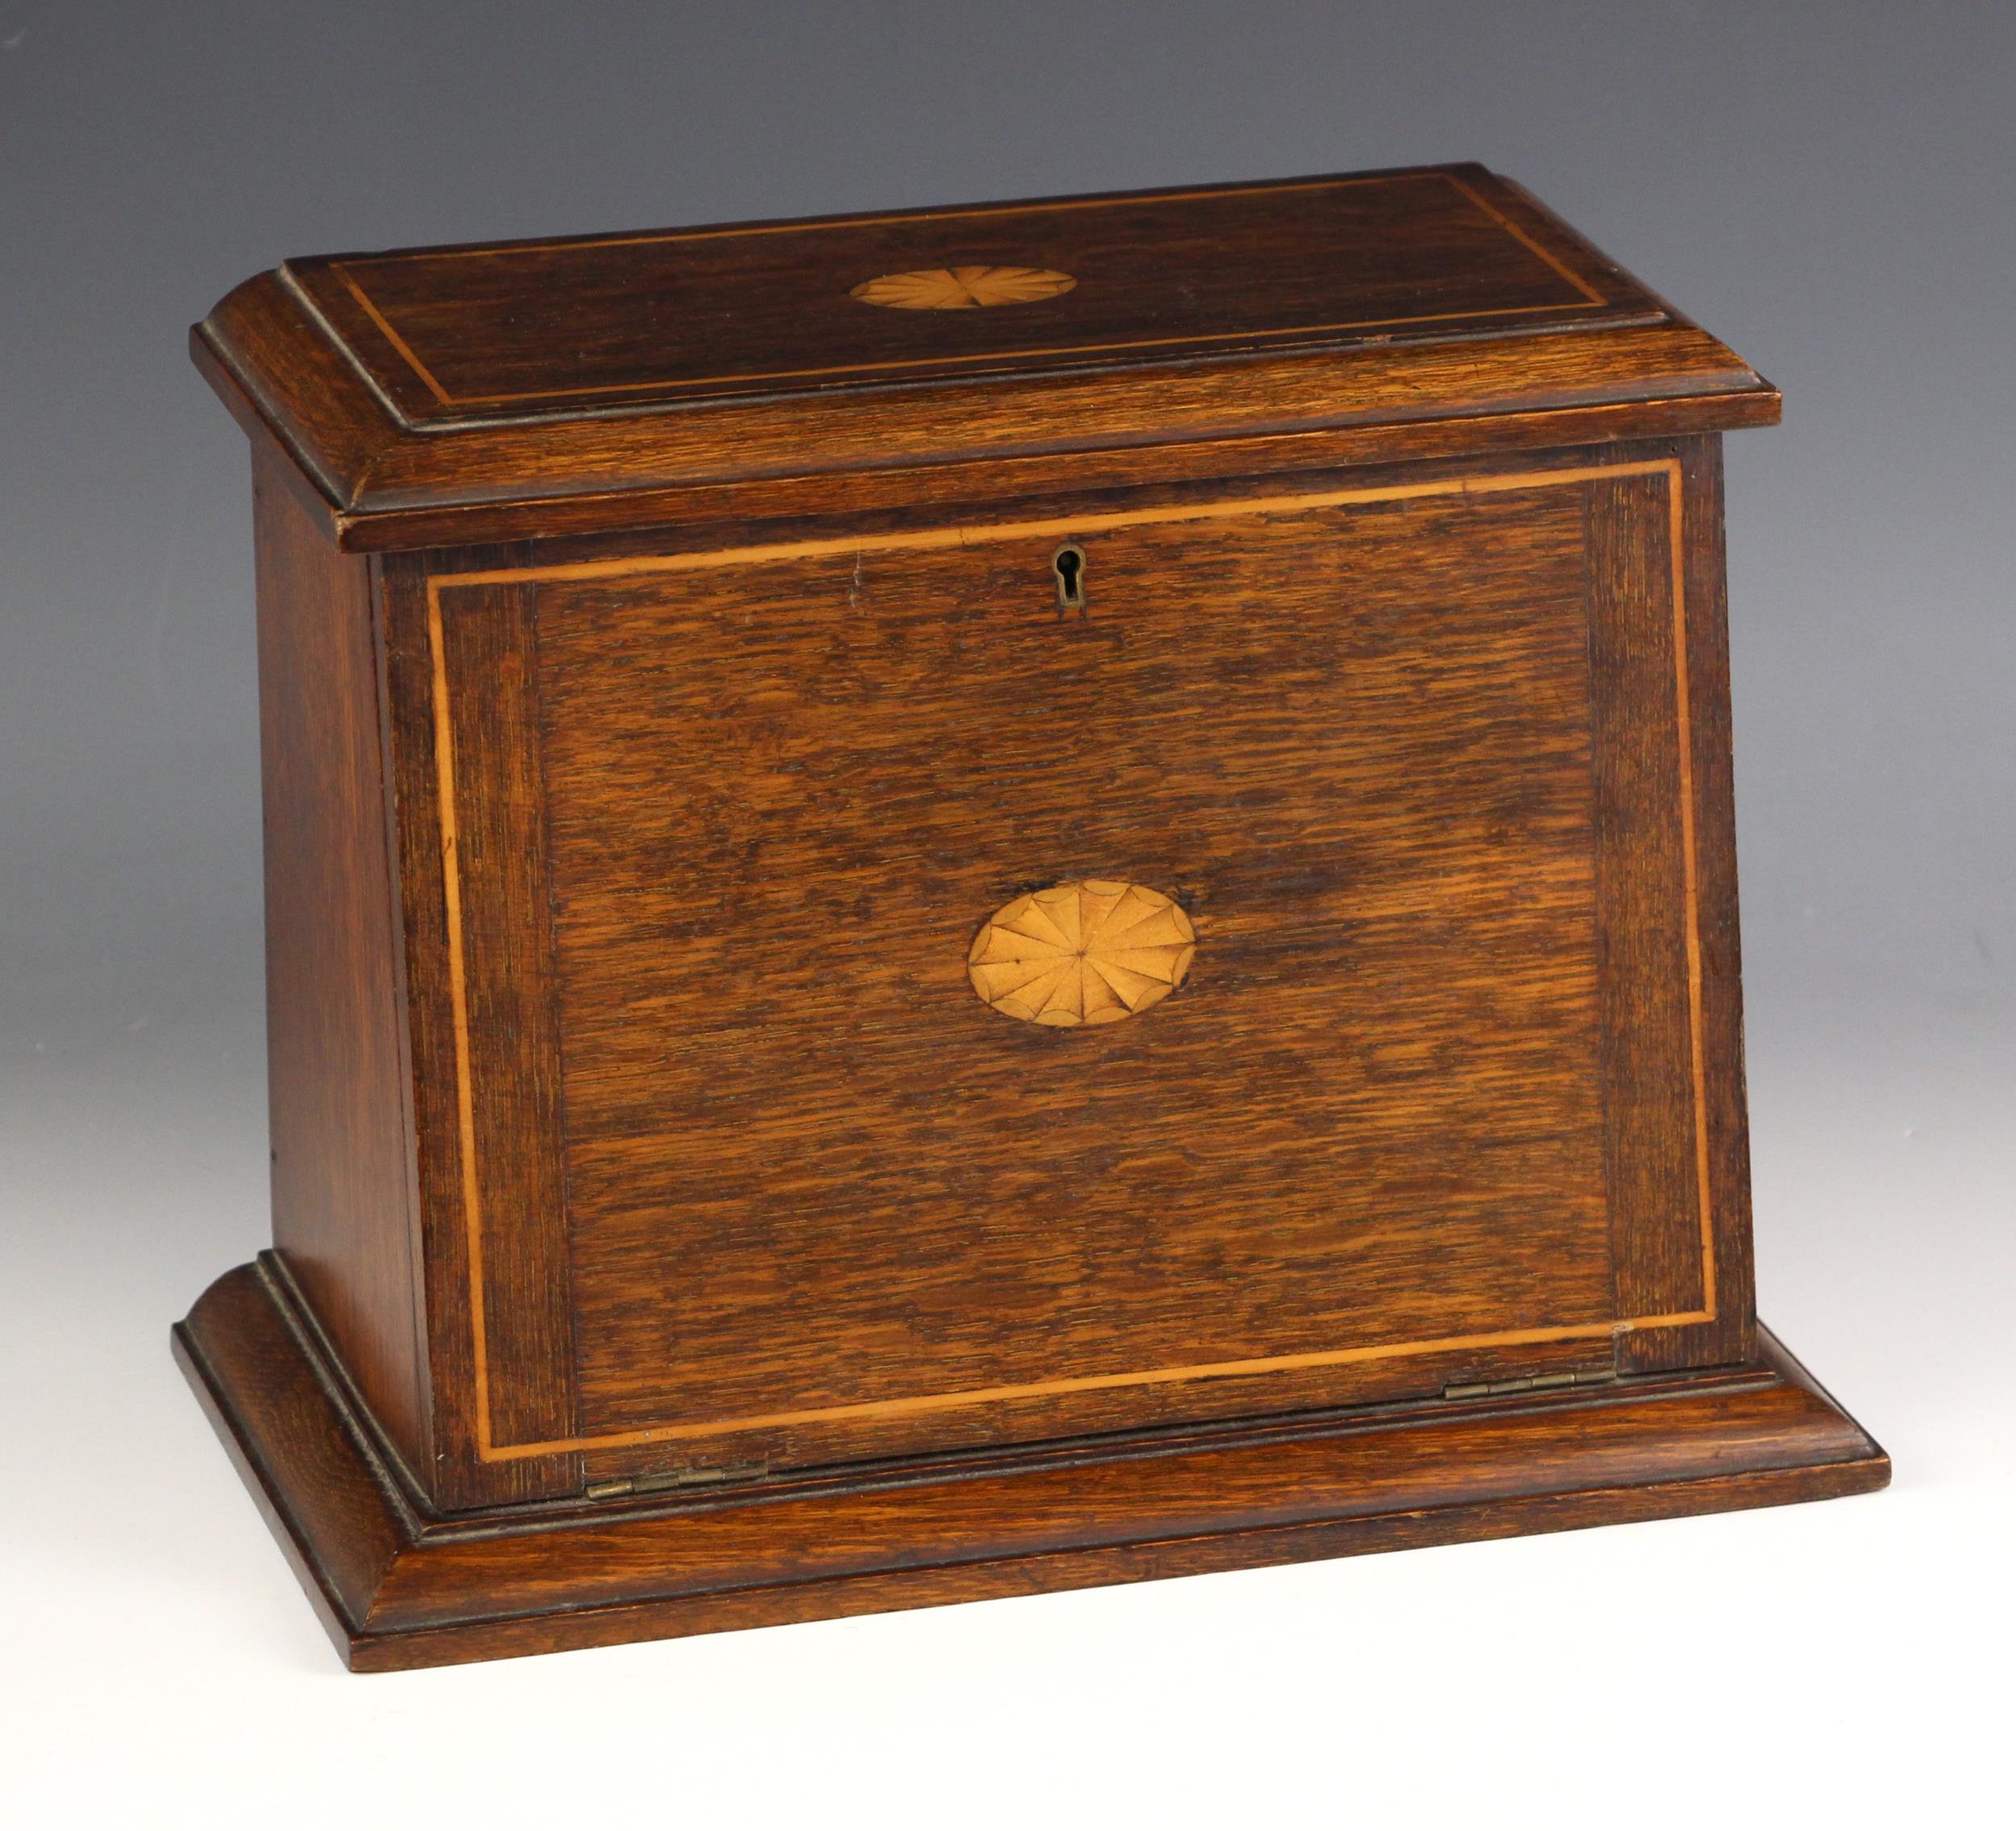 An Edwardian oak and inlaid stationary cabinet, the hinged top and fall front centred with an inlaid